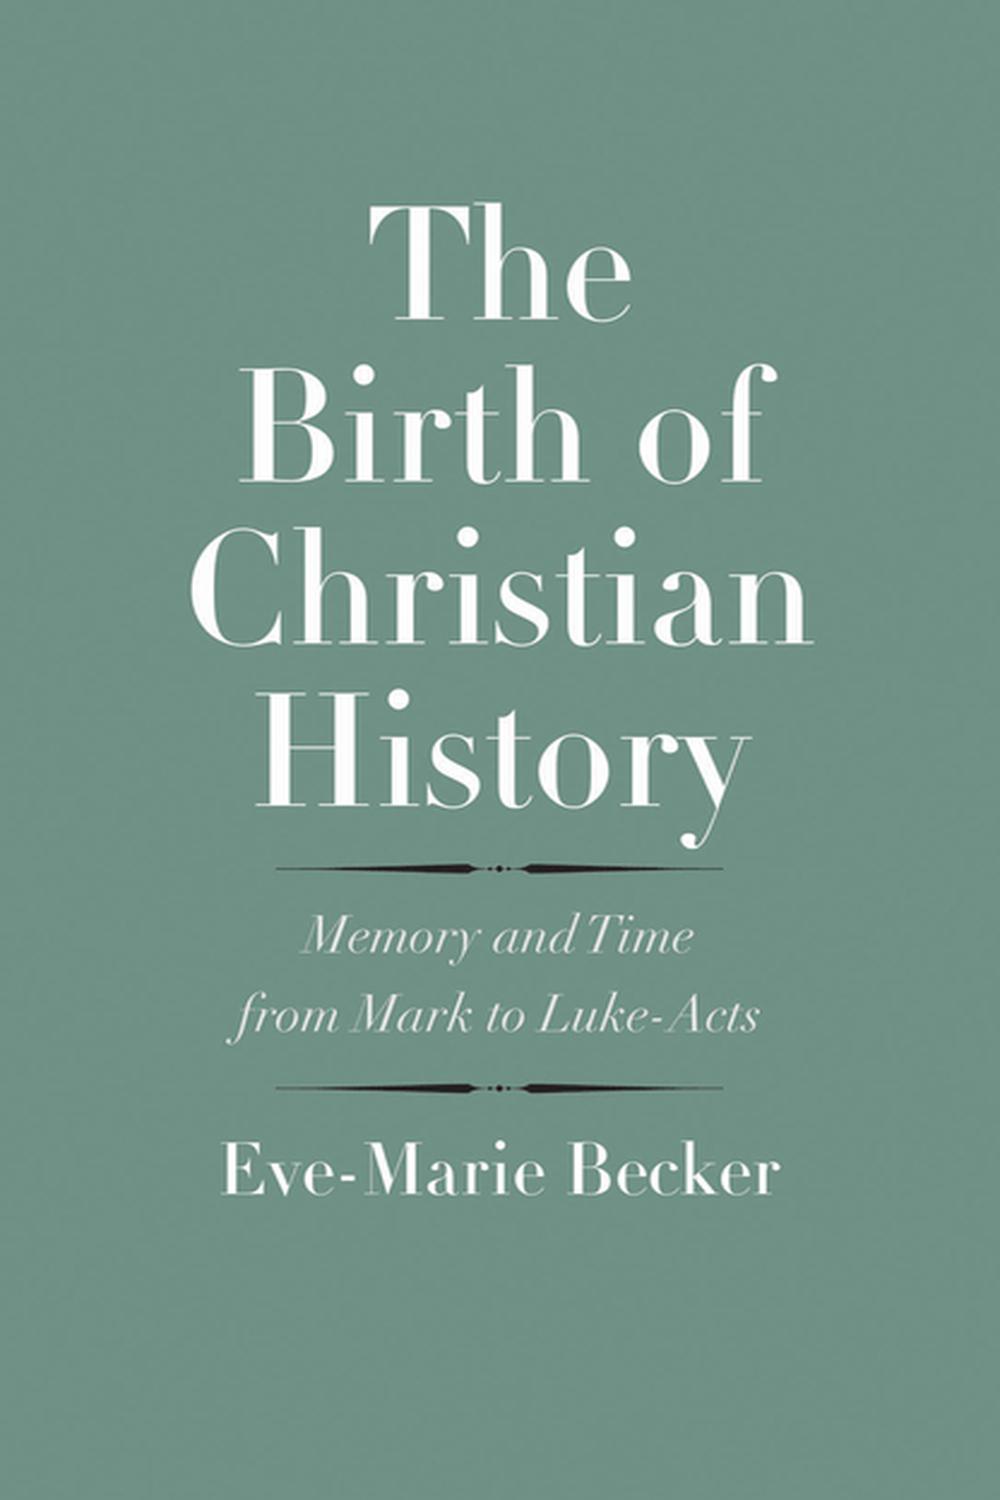 The Birth of Christian History - Eve-Marie Becker